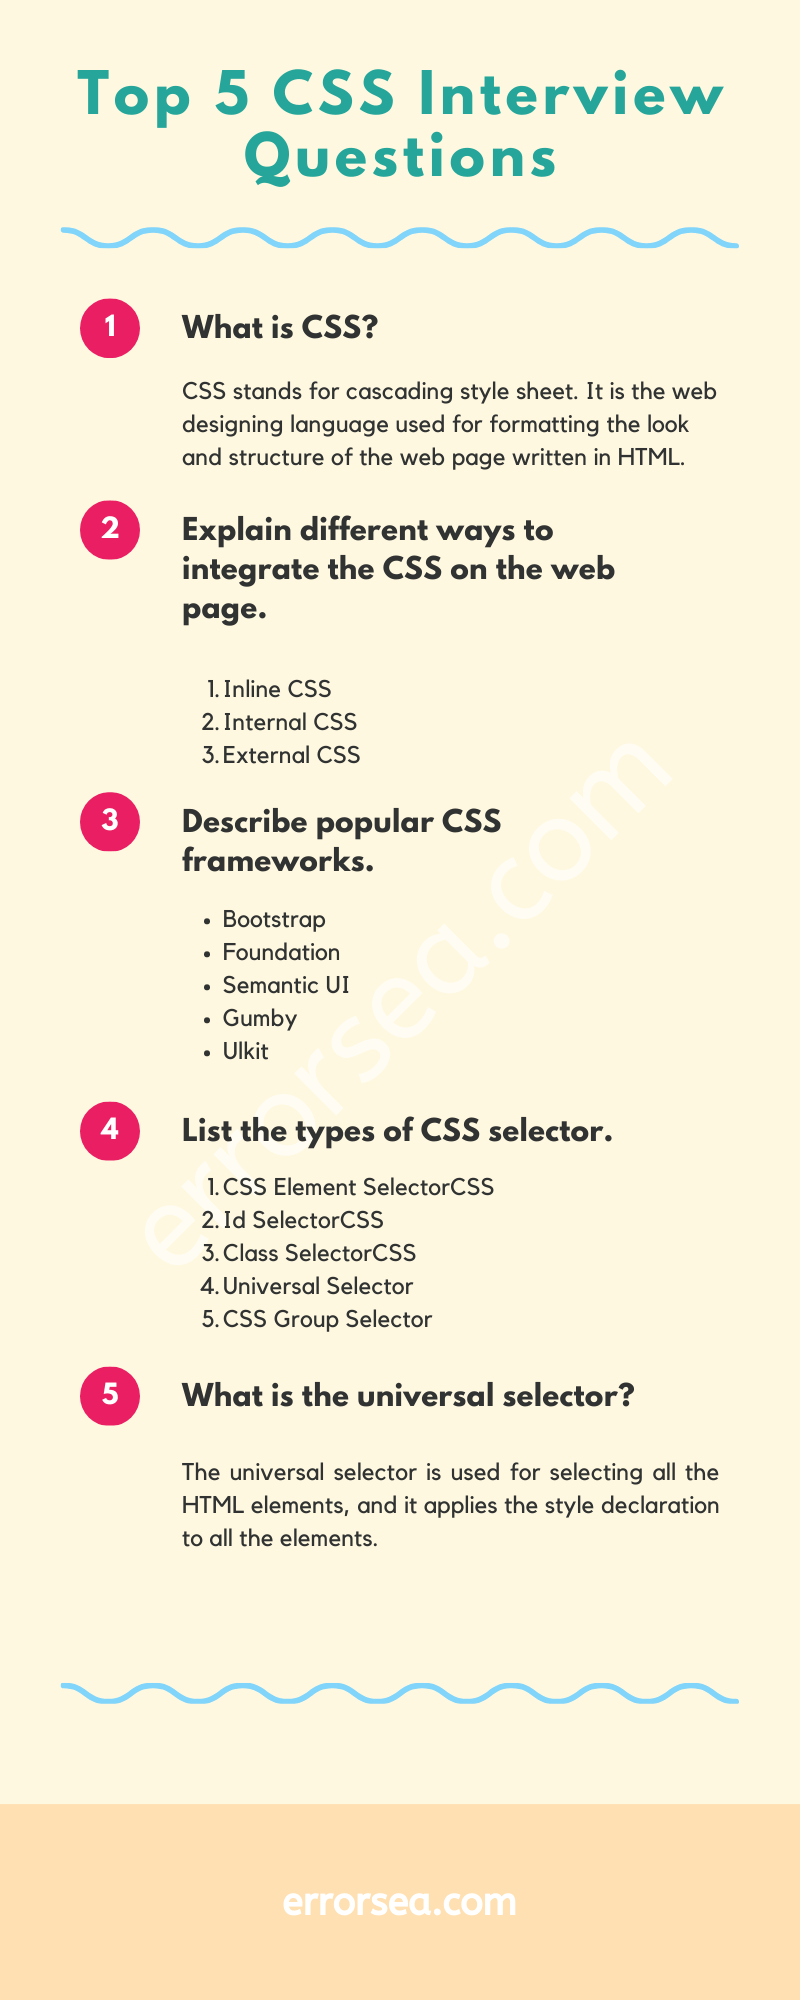 TOP 5 CSS Interview Questions and Answers